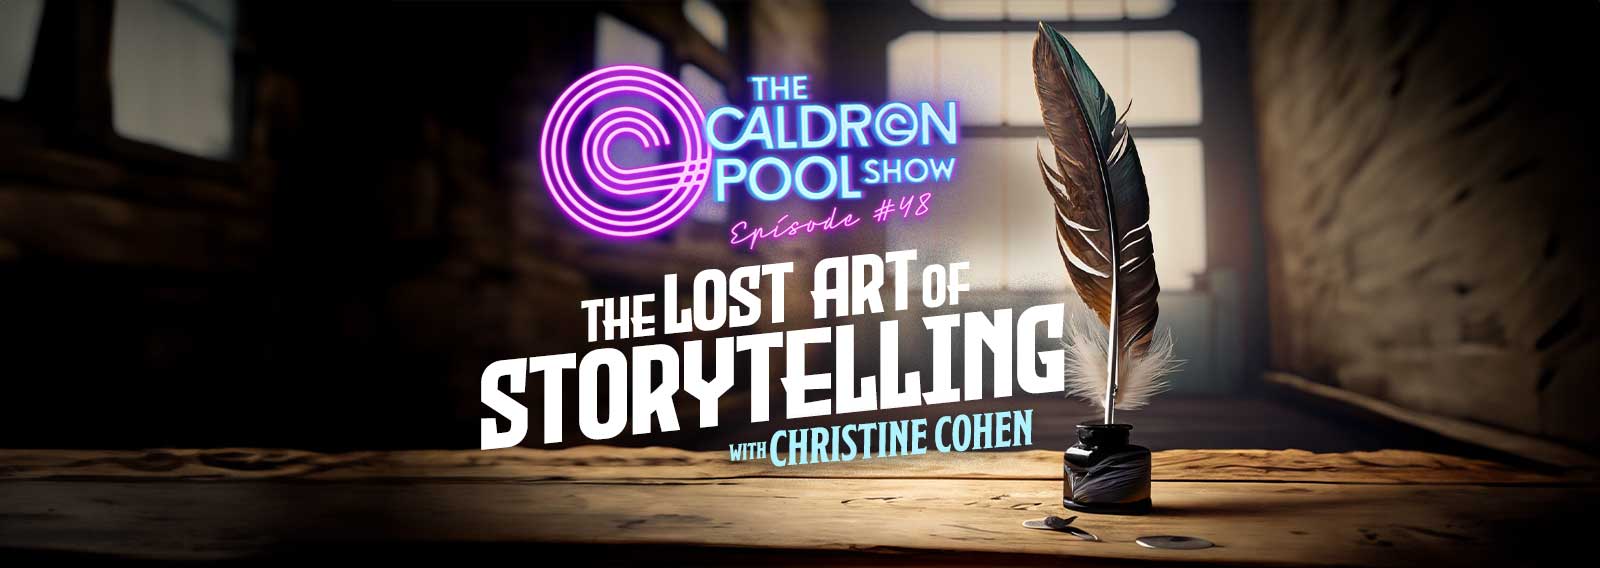 The Caldron Pool Show: #48 The Lost Art of Storytelling (with Christine Cohen)